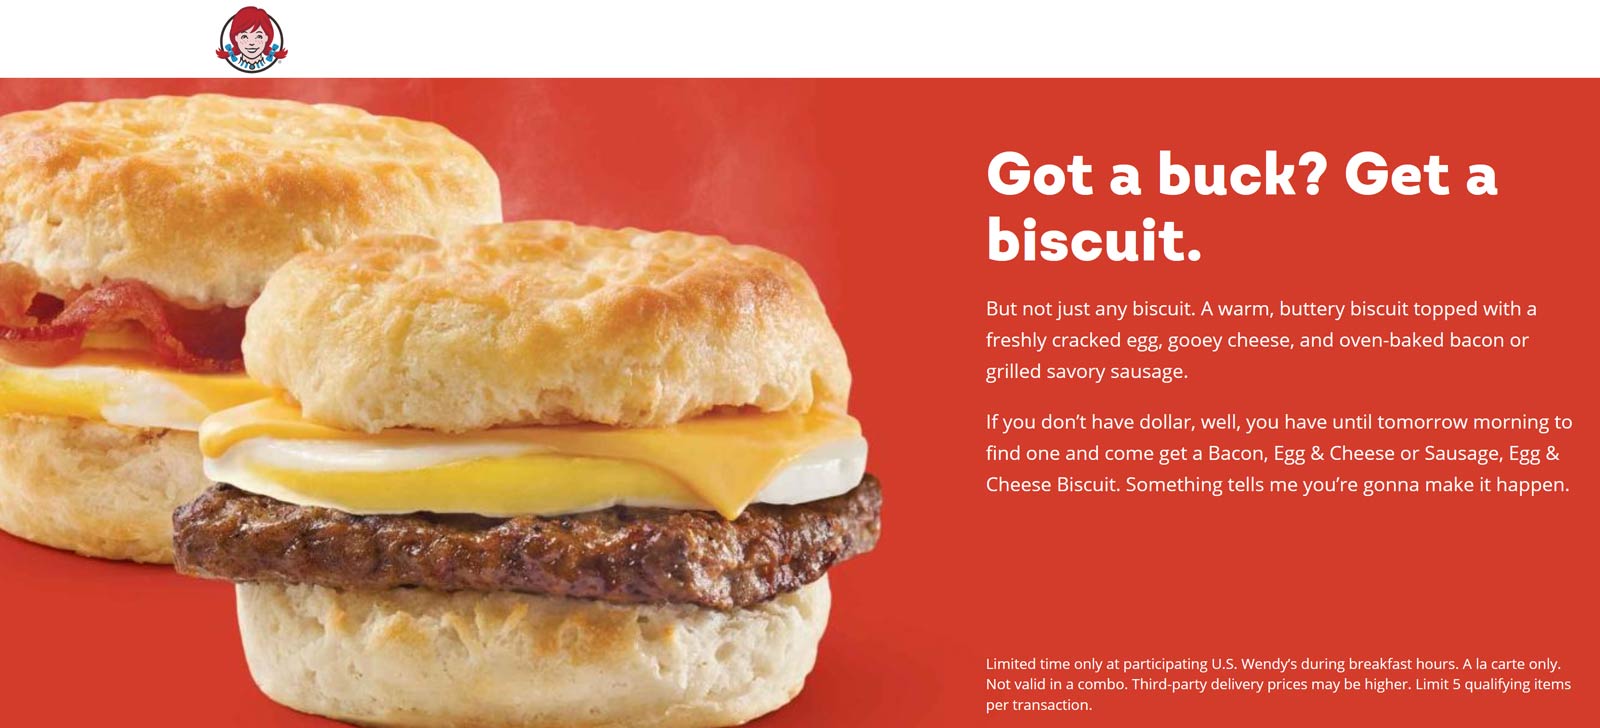 Wendys restaurants Coupon  $1 bacon or sausage egg & cheese breakfast biscuits at Wendys #wendys 